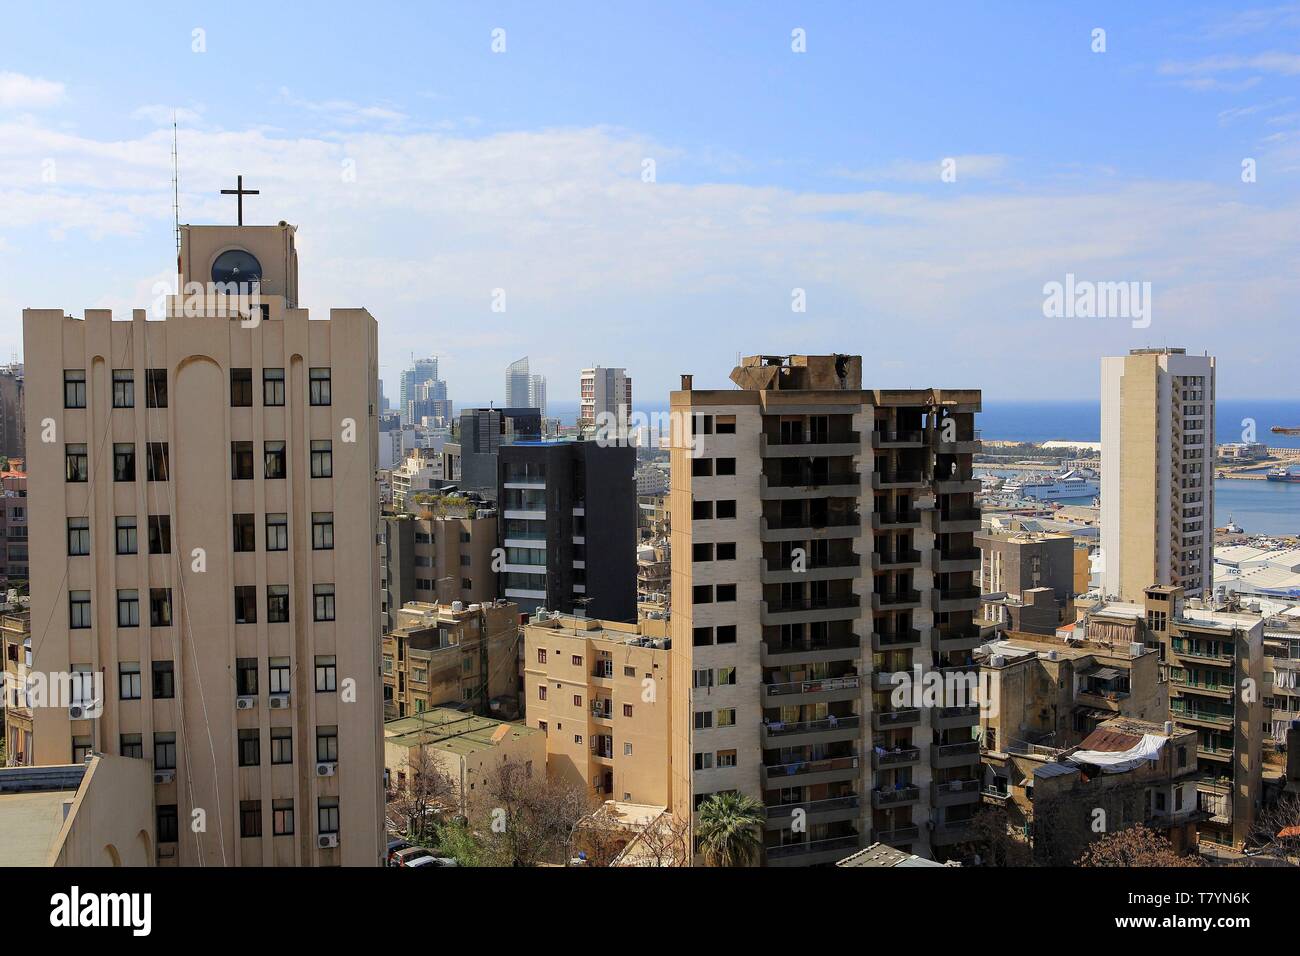 Lebanon, Beirut, modern high-rise buildings with harbor views Stock Photo